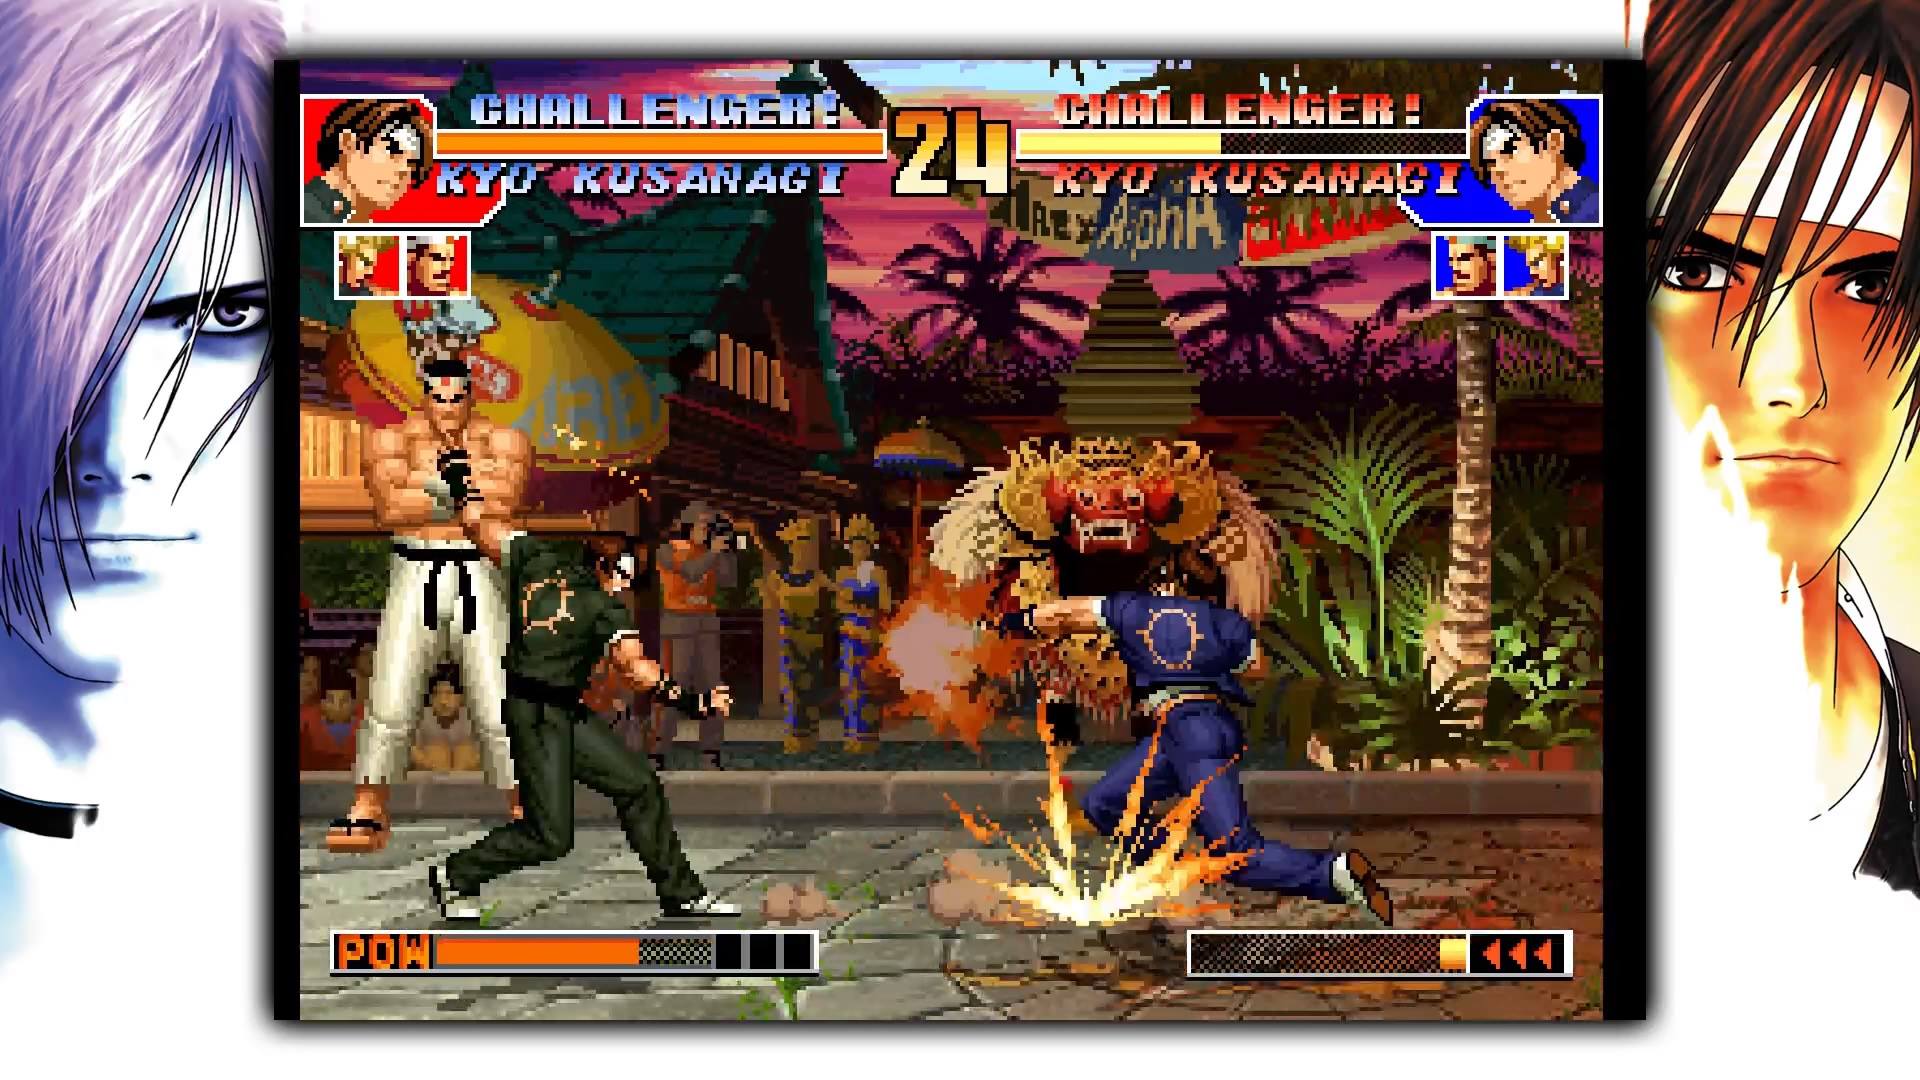 The King of Fighters '97 Global Match PC Game - Free Download Full